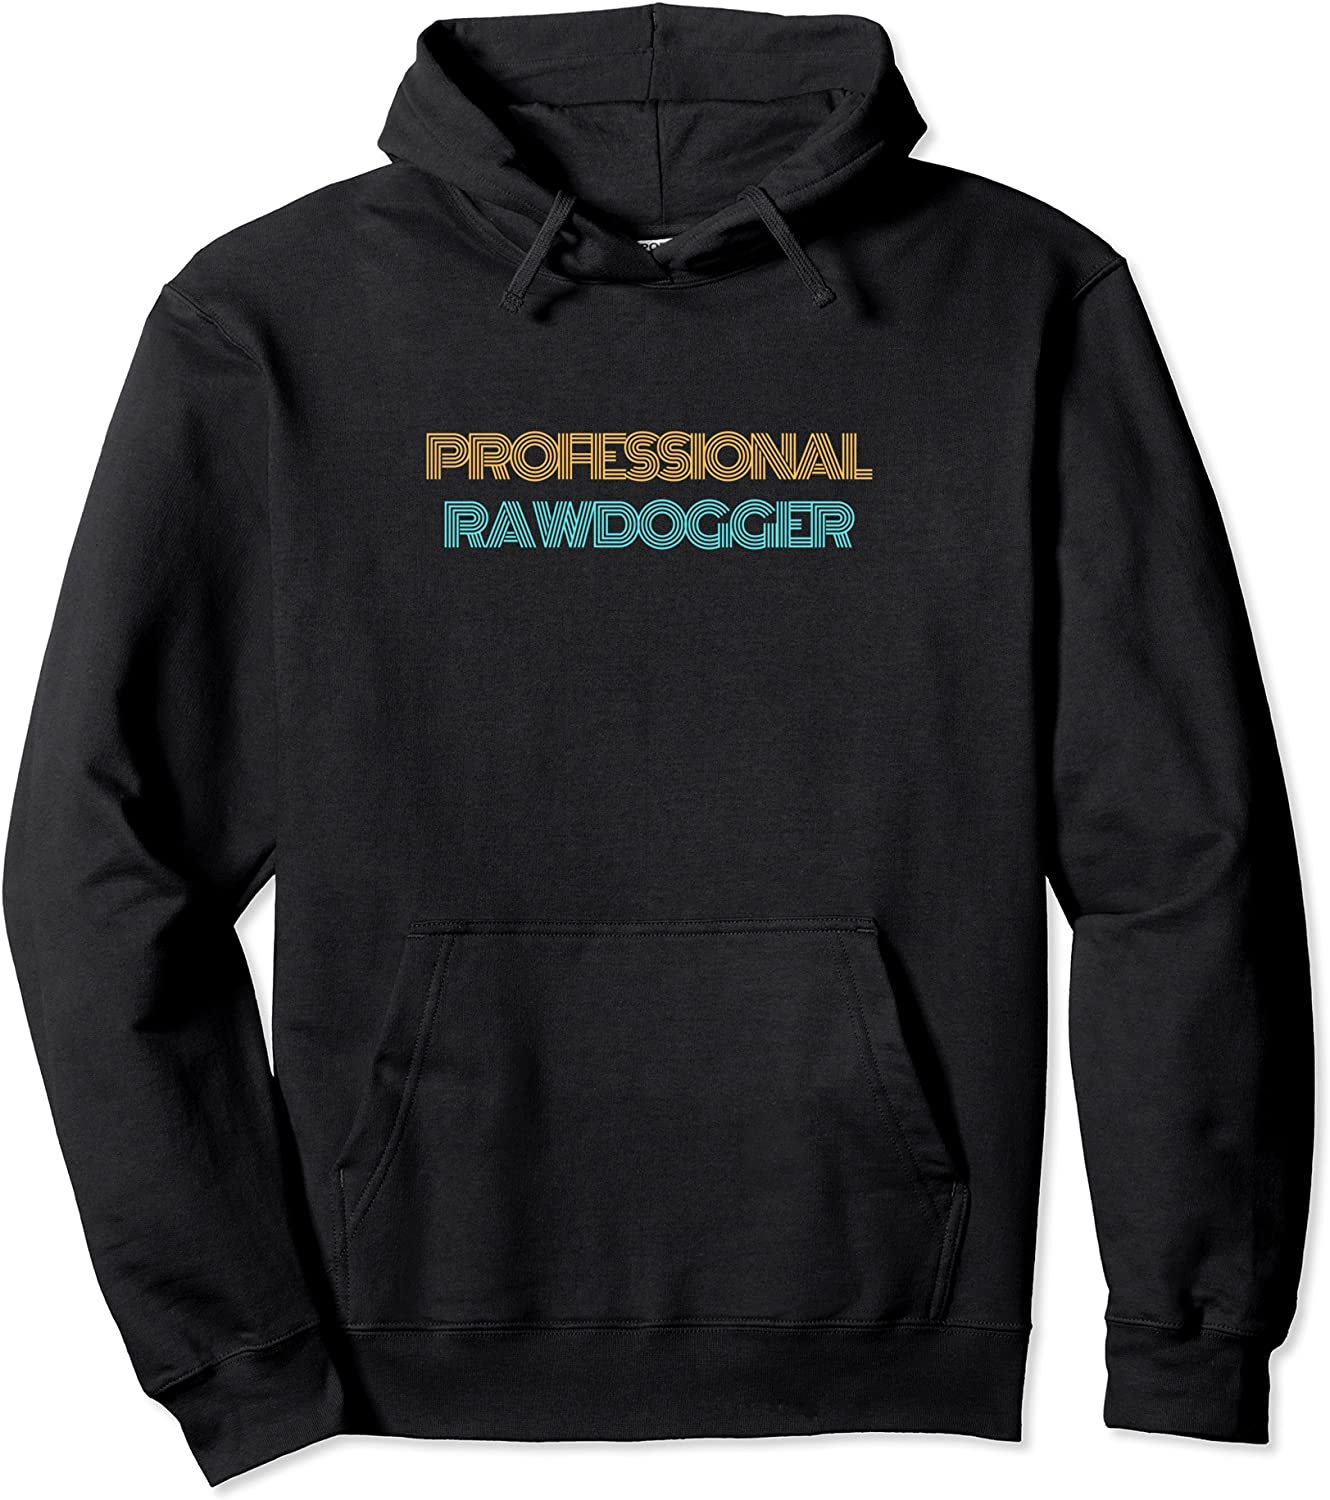 PROFESSIONALS RAWDOGGER CLASSIC Pullover Hoodie, Jidion Hoodie#1